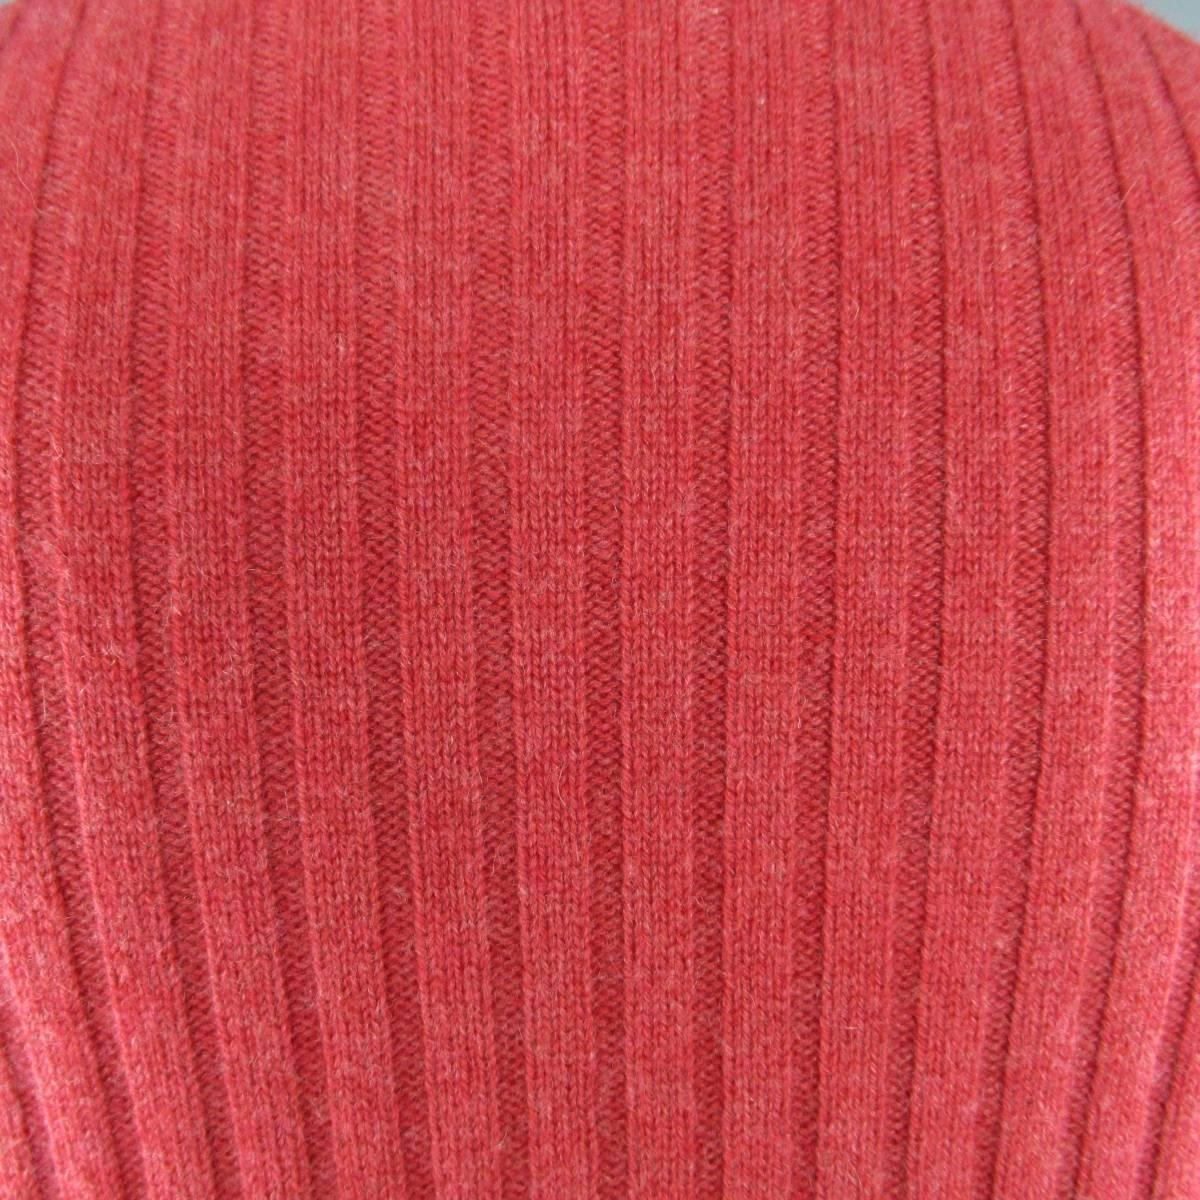 Men's BRUNELLO CUCINELLI Size S Light Red Ribbed Knit Cashmere Half Zip Pullover 3